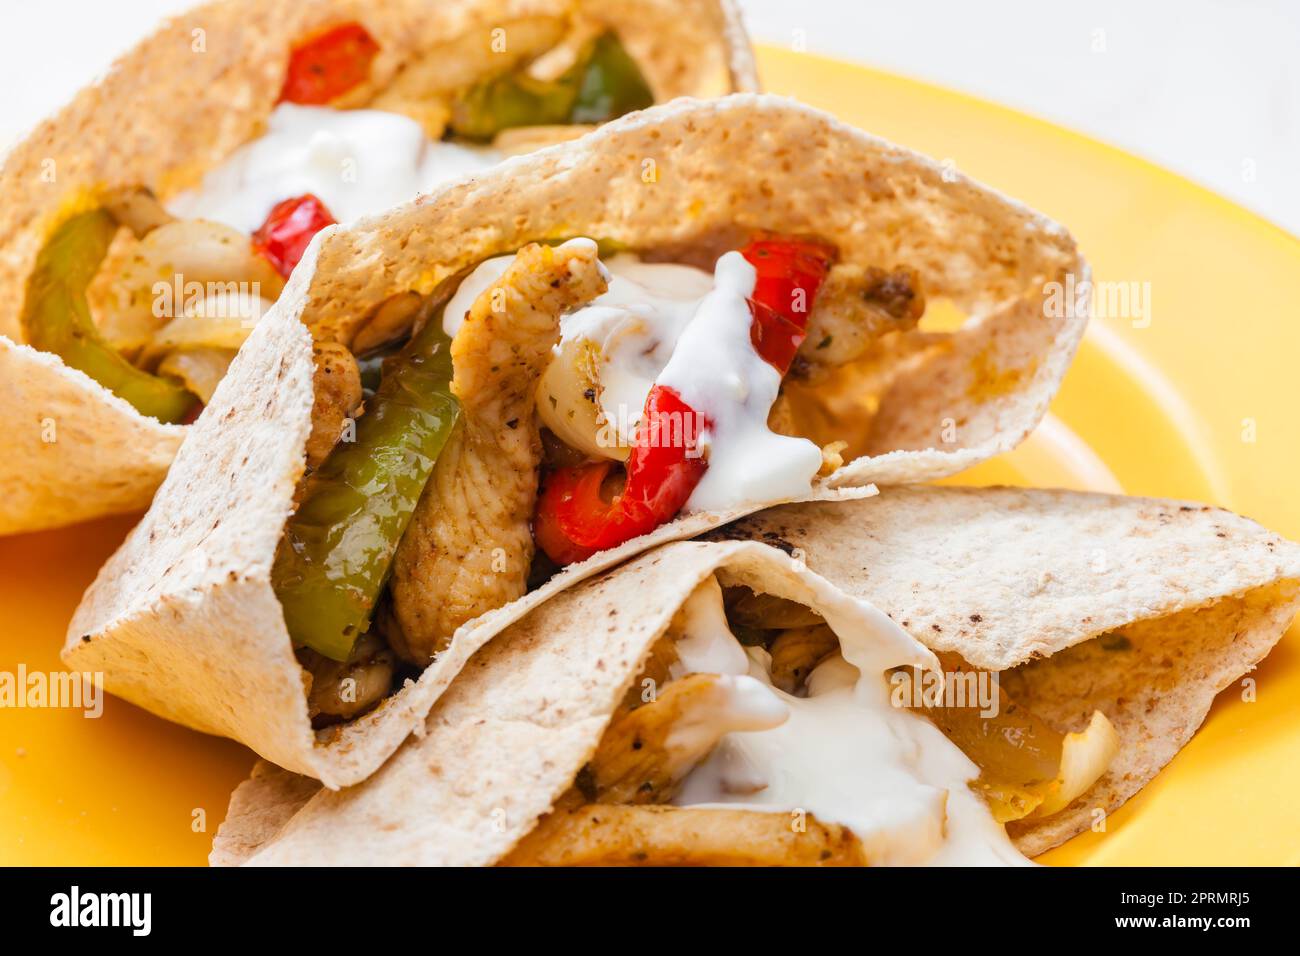 wholewheat  pitta bread filled with grilled chicken meat, jalapenos and red pepper Stock Photo